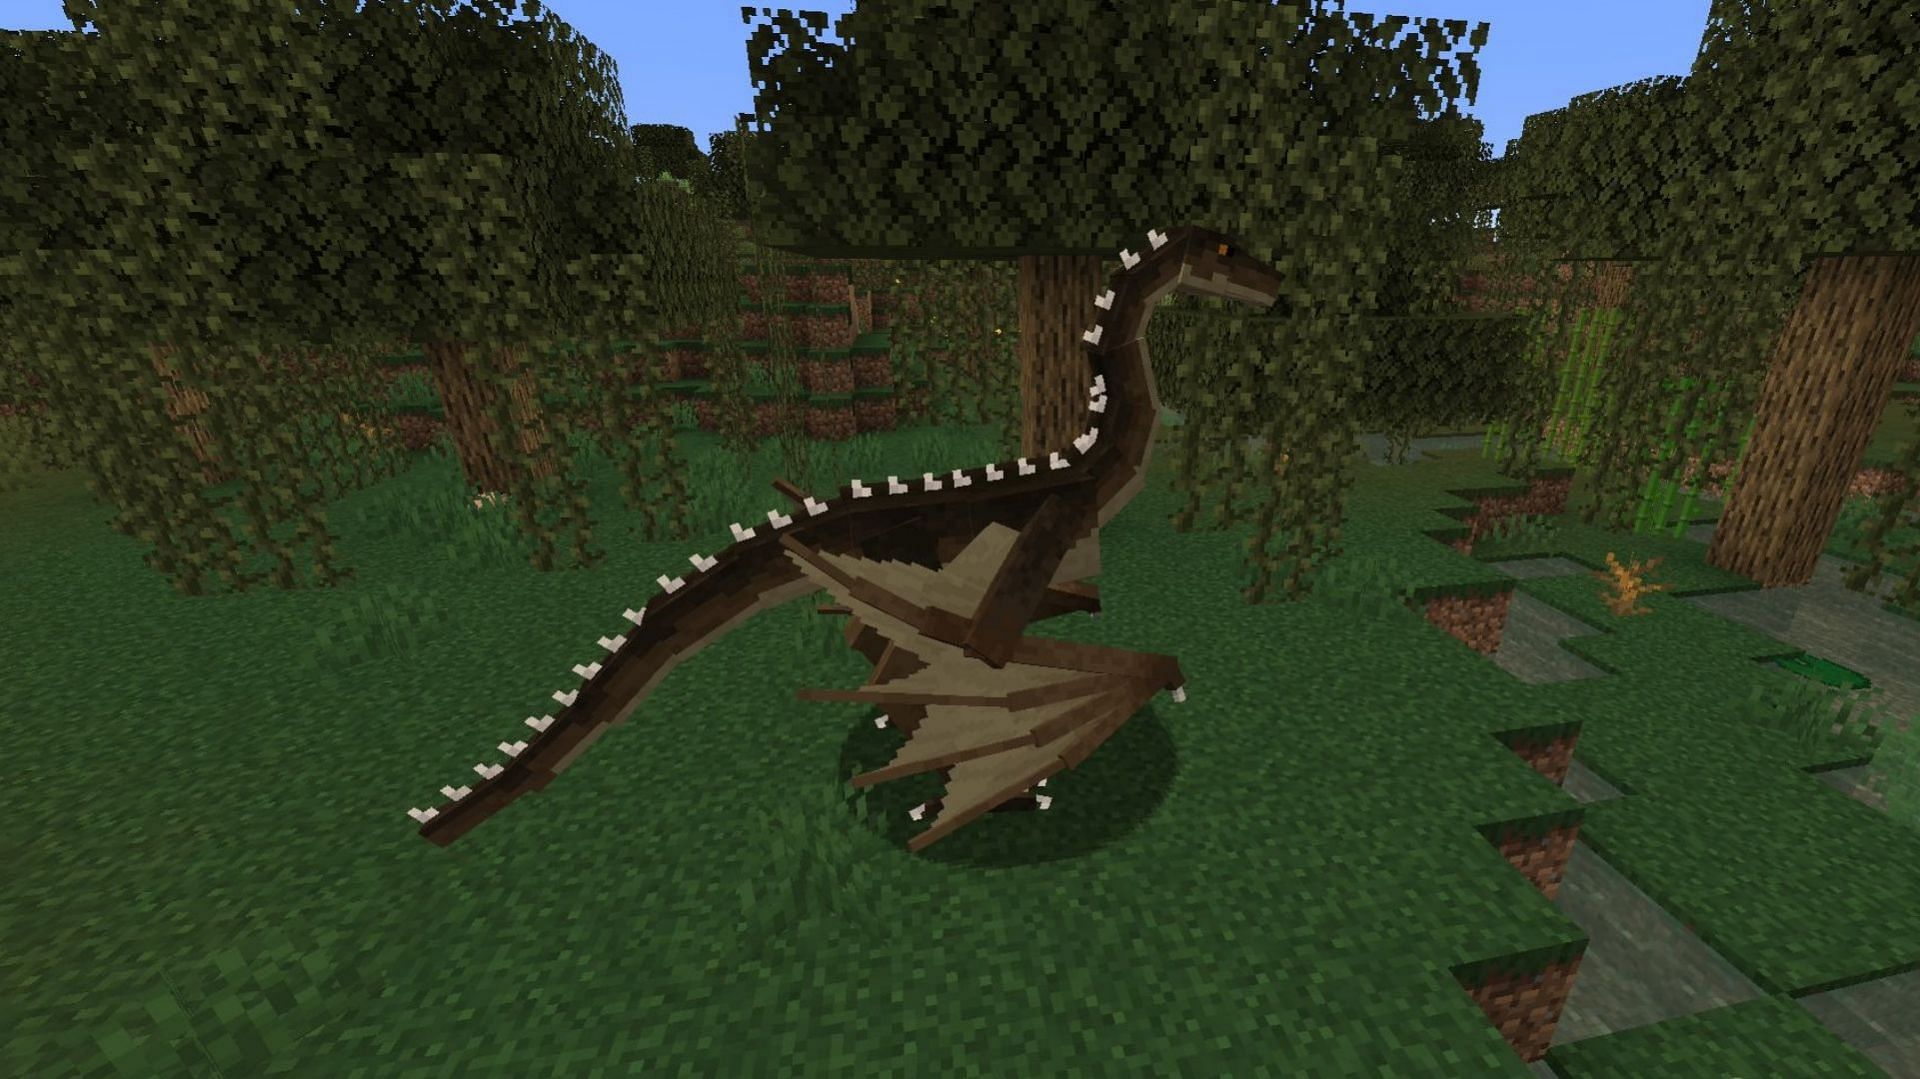 Useless Reptile is a simple mod that adds neutral reptiles to Swamp biomes (Image via Mojang Studios || 9Minecraft)